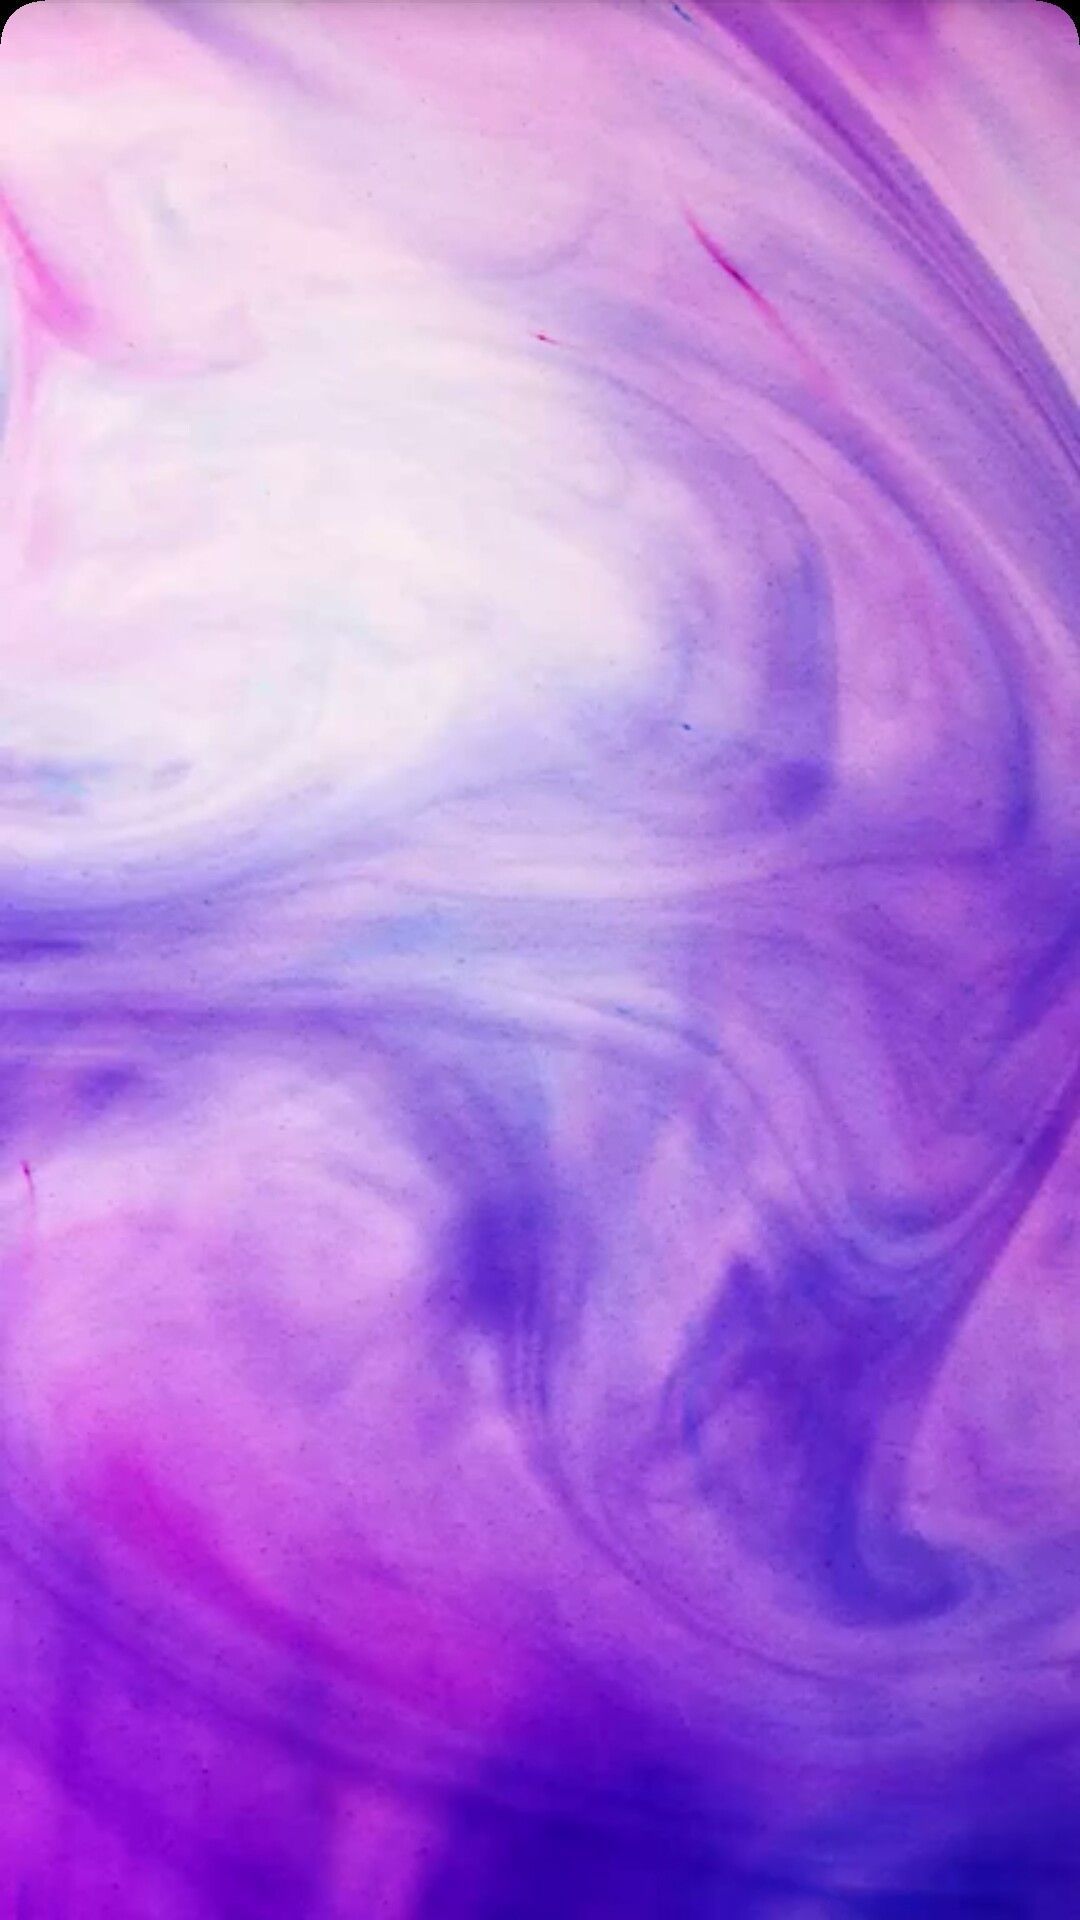 A purple and pink swirl pattern on the screen - Watercolor